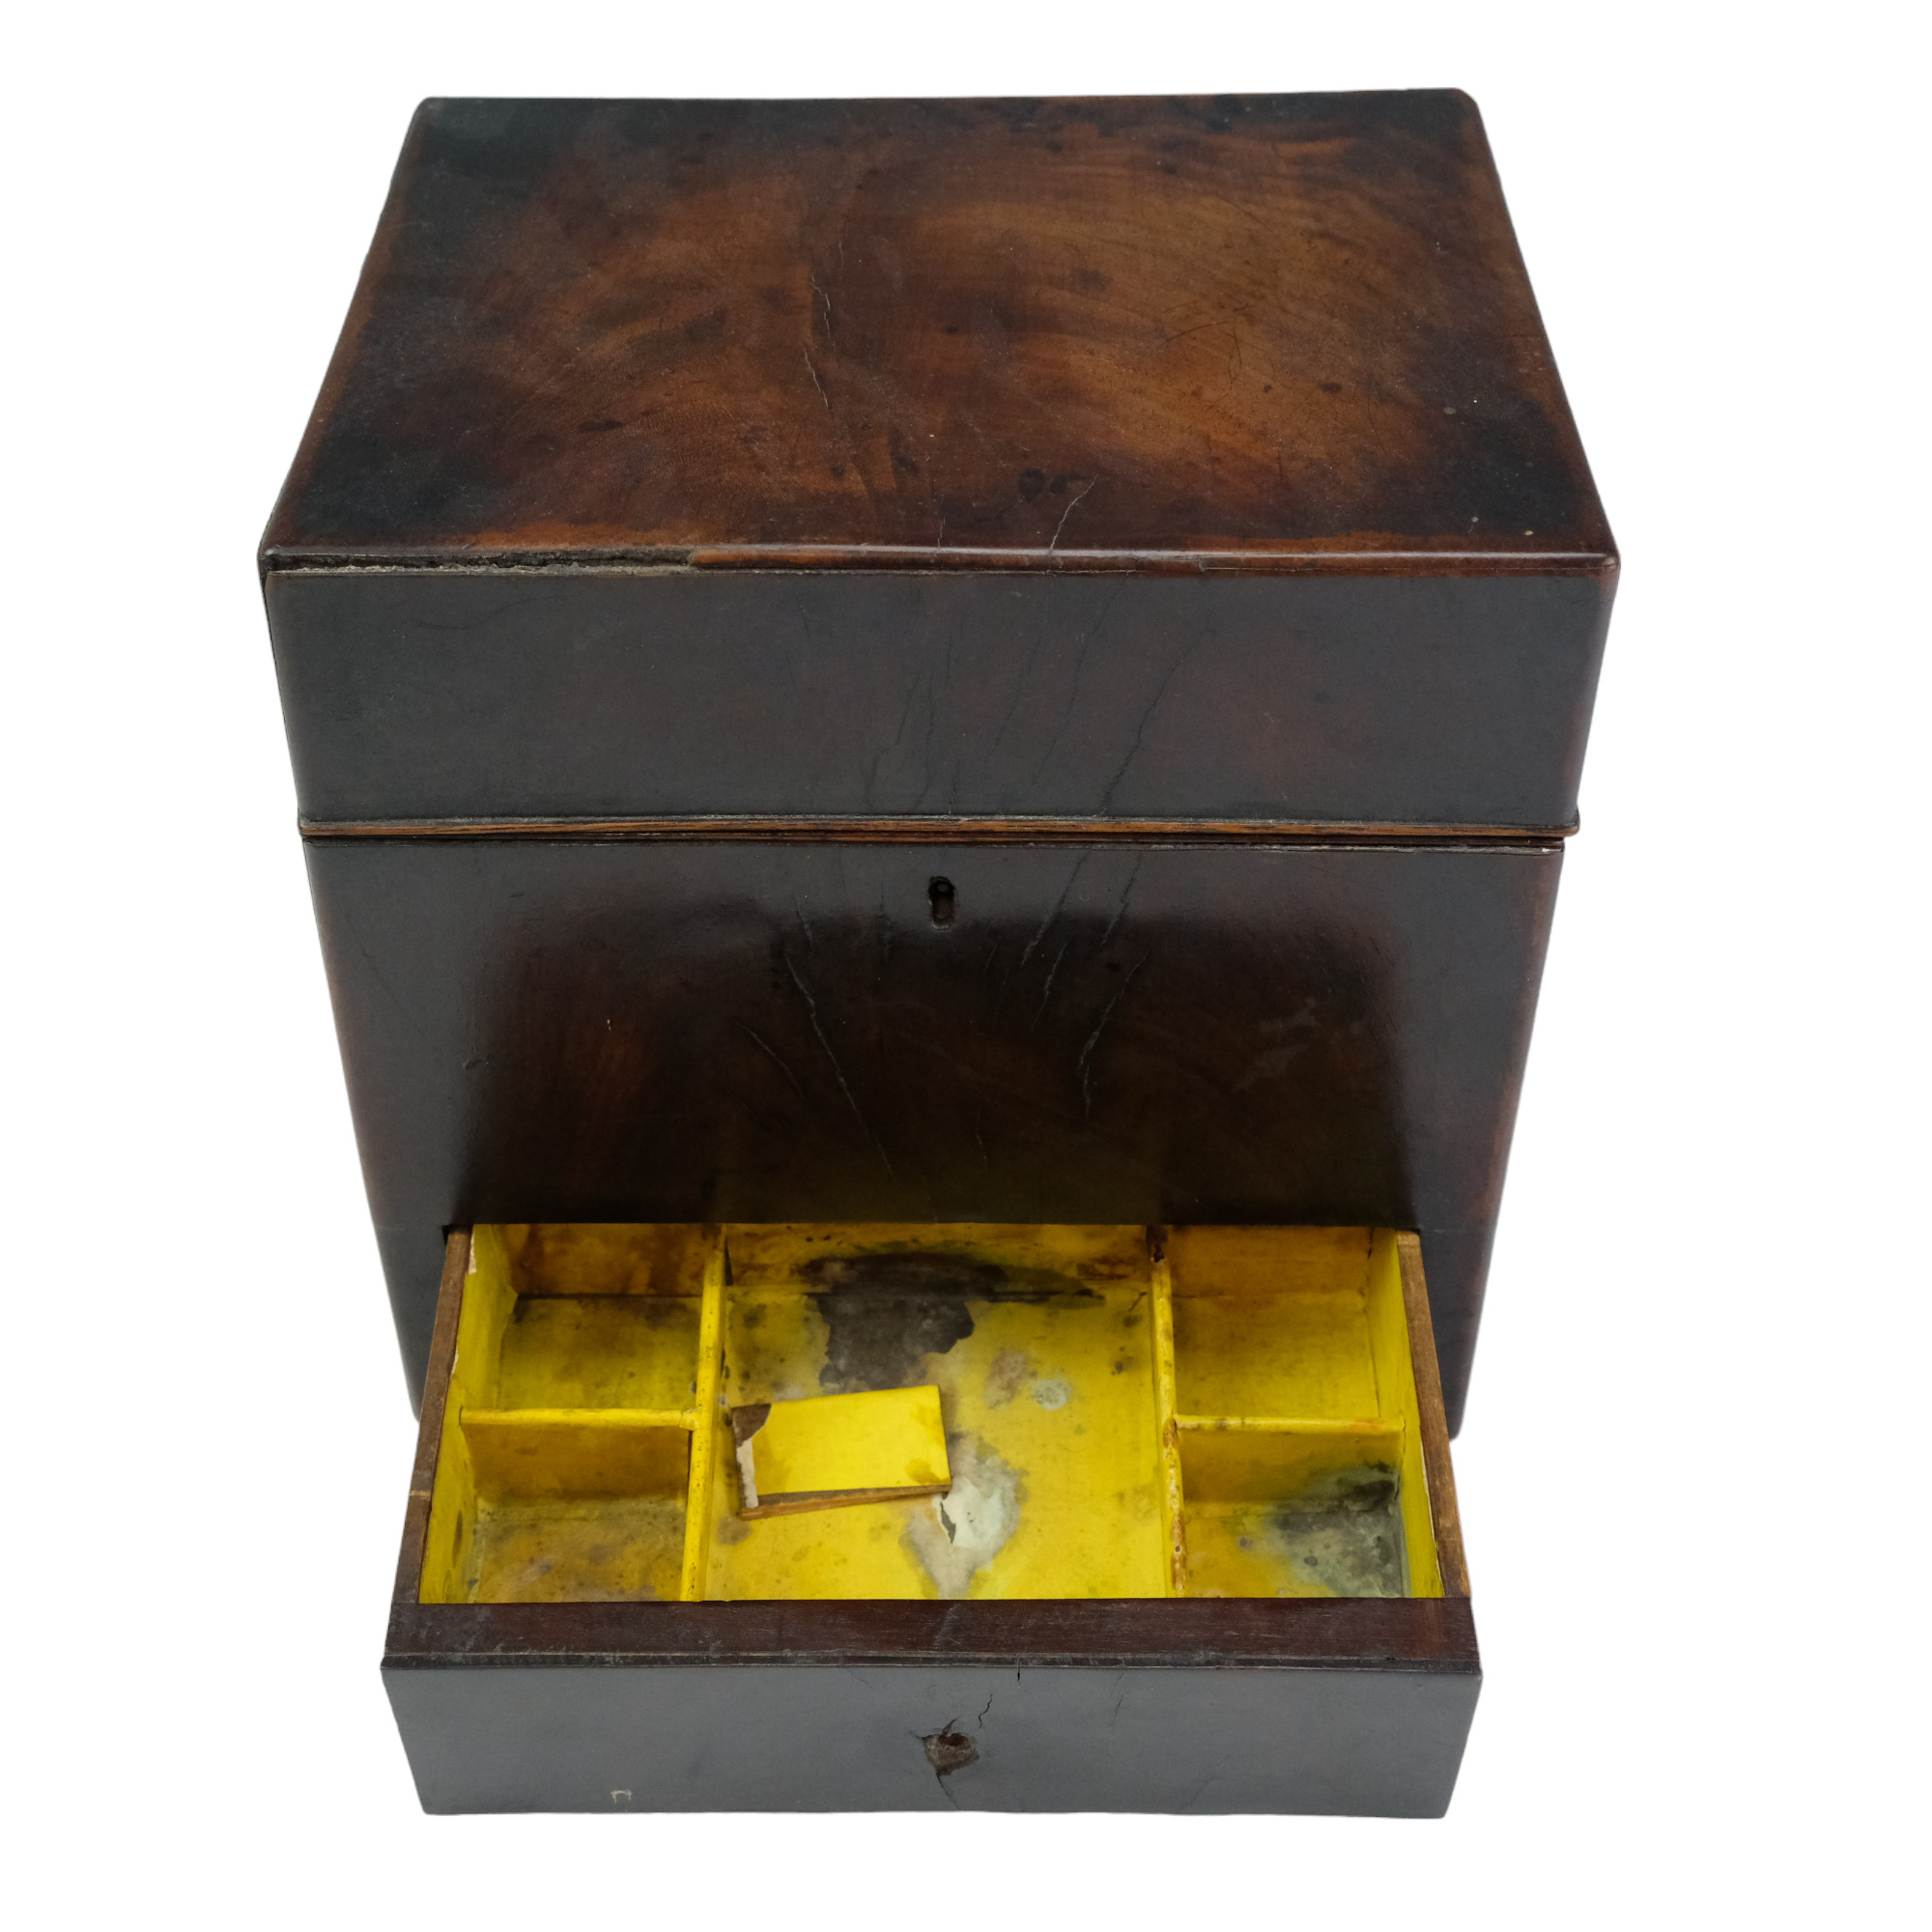 A George III mahogany apothecary's cabinet / medicine chest, having a cockbeaded hinged lid - Image 4 of 4